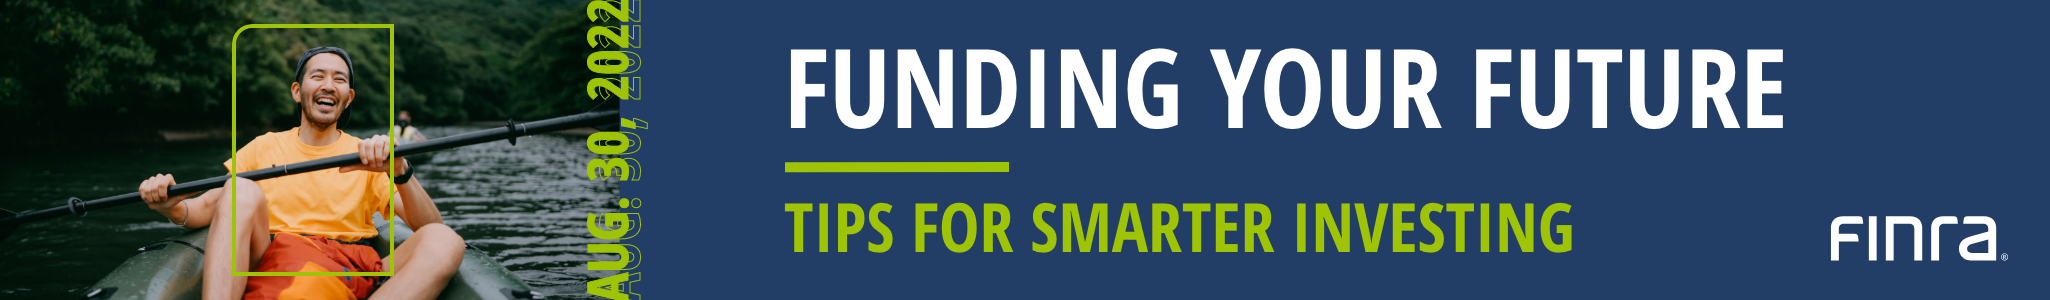 Funding Your Future: Tips for Smarter Investing - April 7, 2022